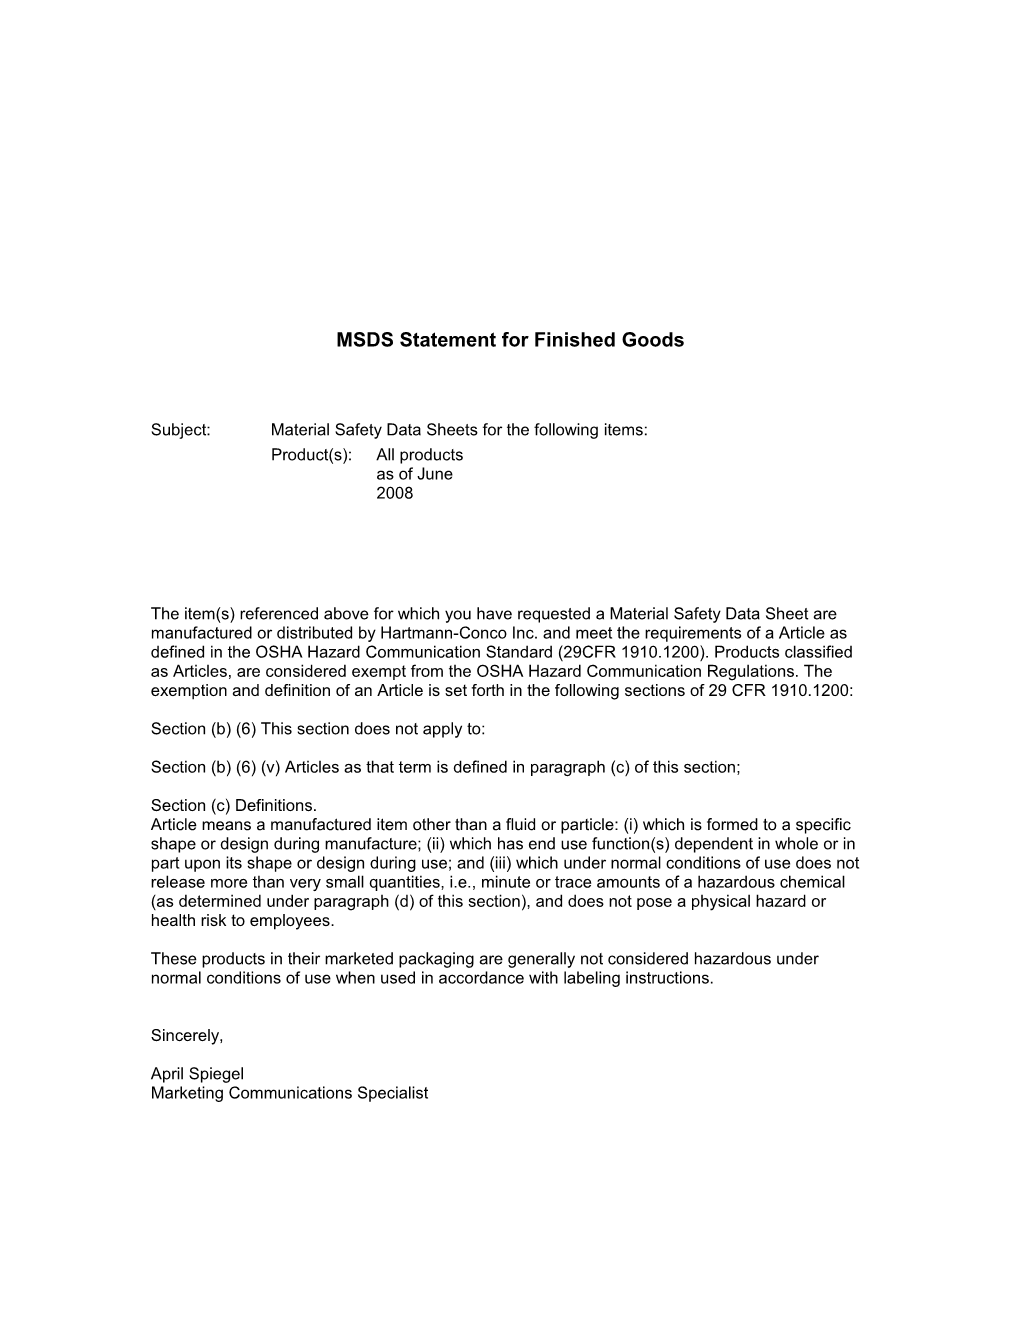 MSDS Statement for Finished Goods